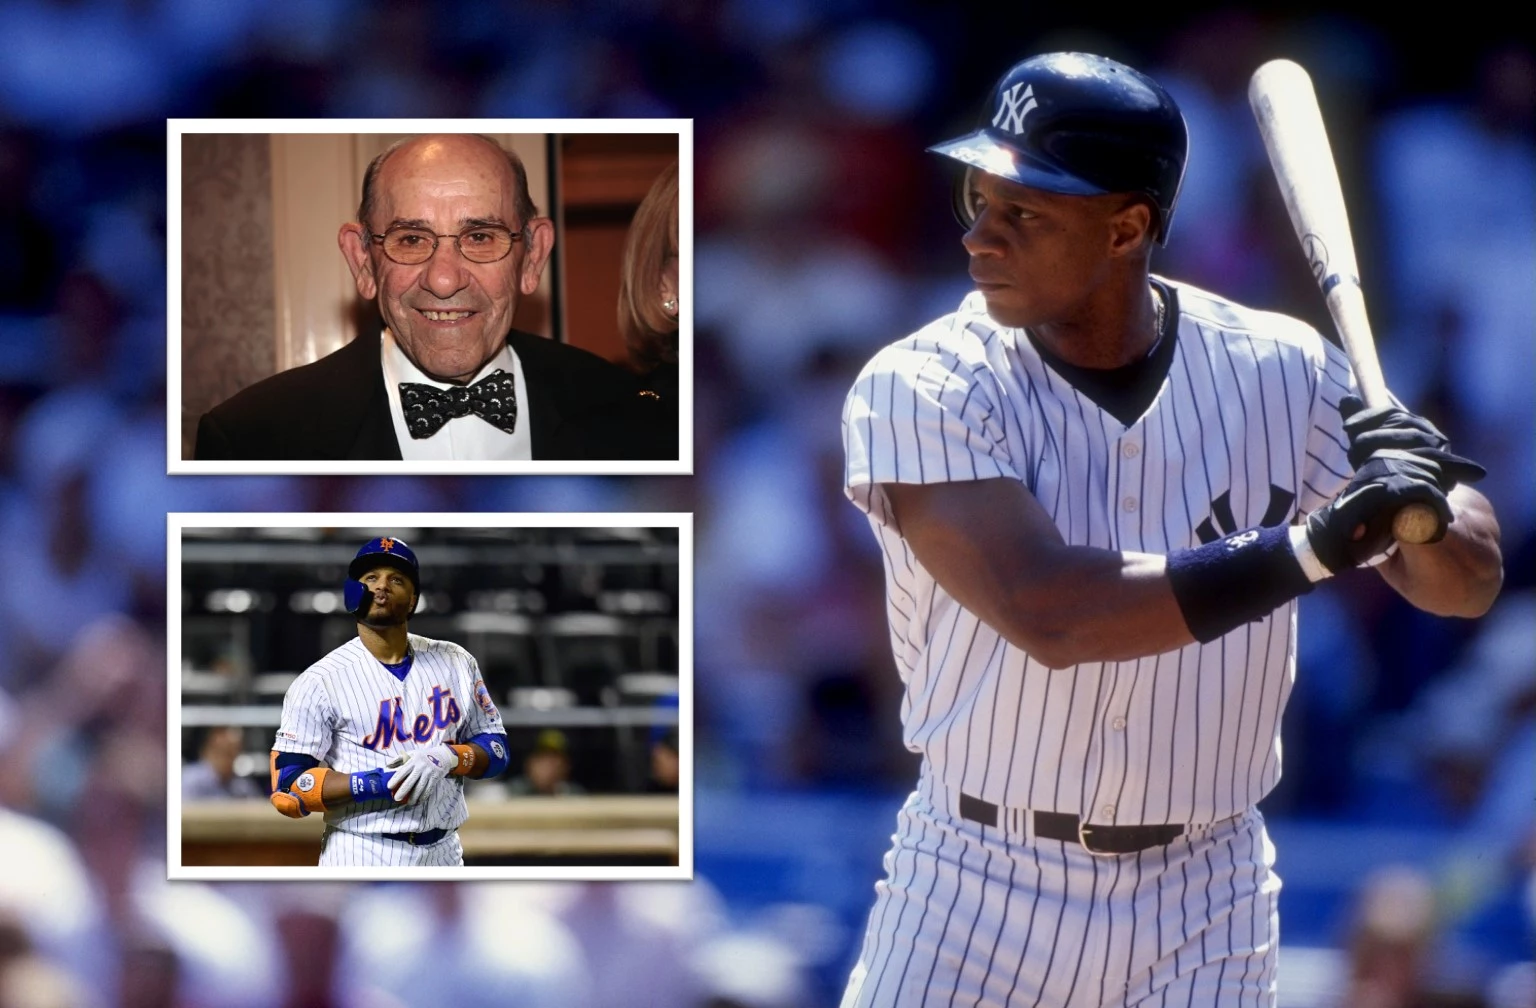 Mets Old-Timers reminisce about New York memories